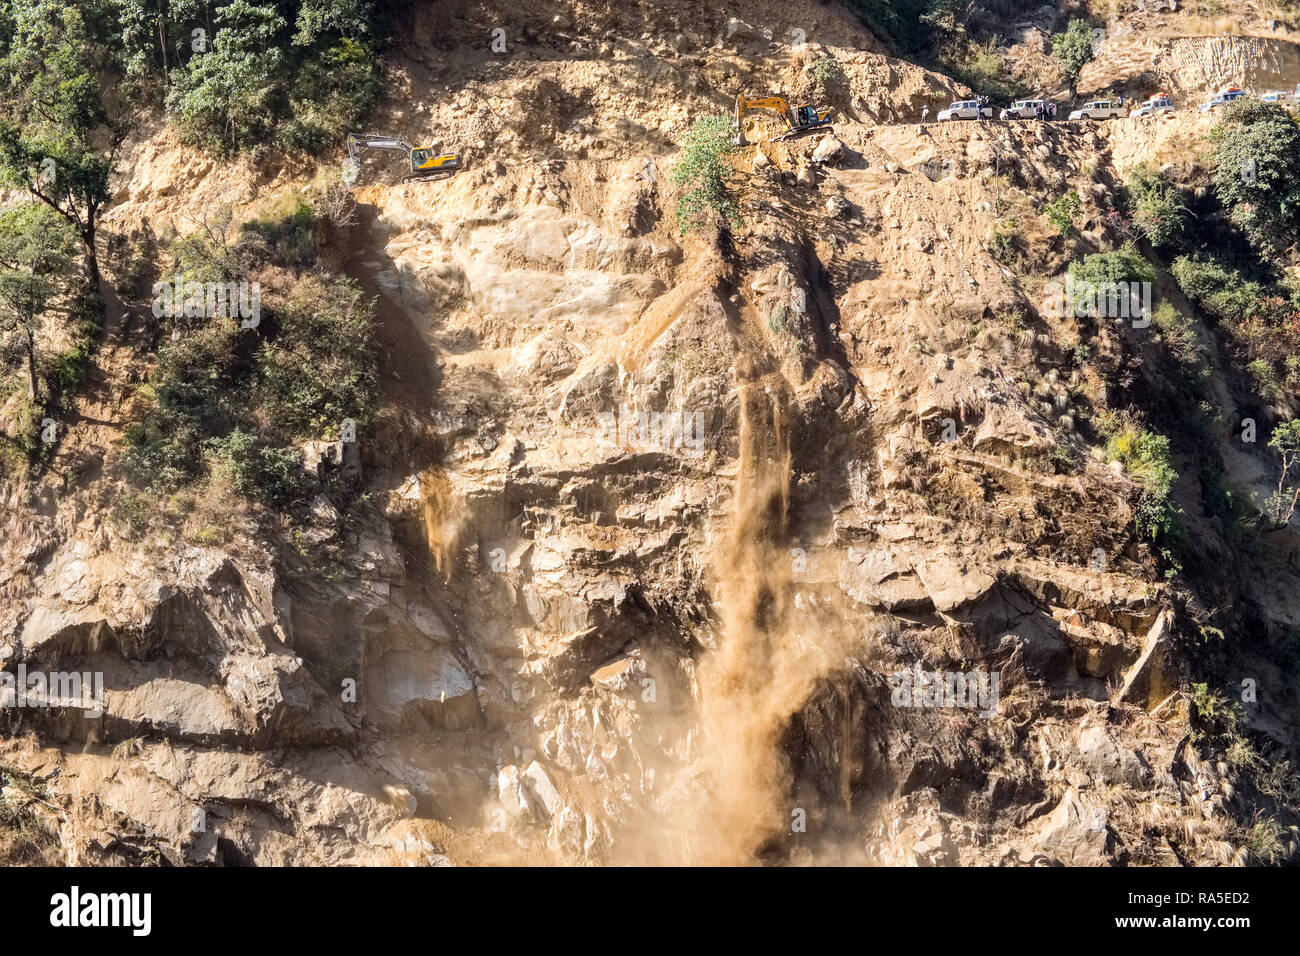 Road construction work sending dirt and rubble down a hillside in the Nepal Himalayas Stock Photo